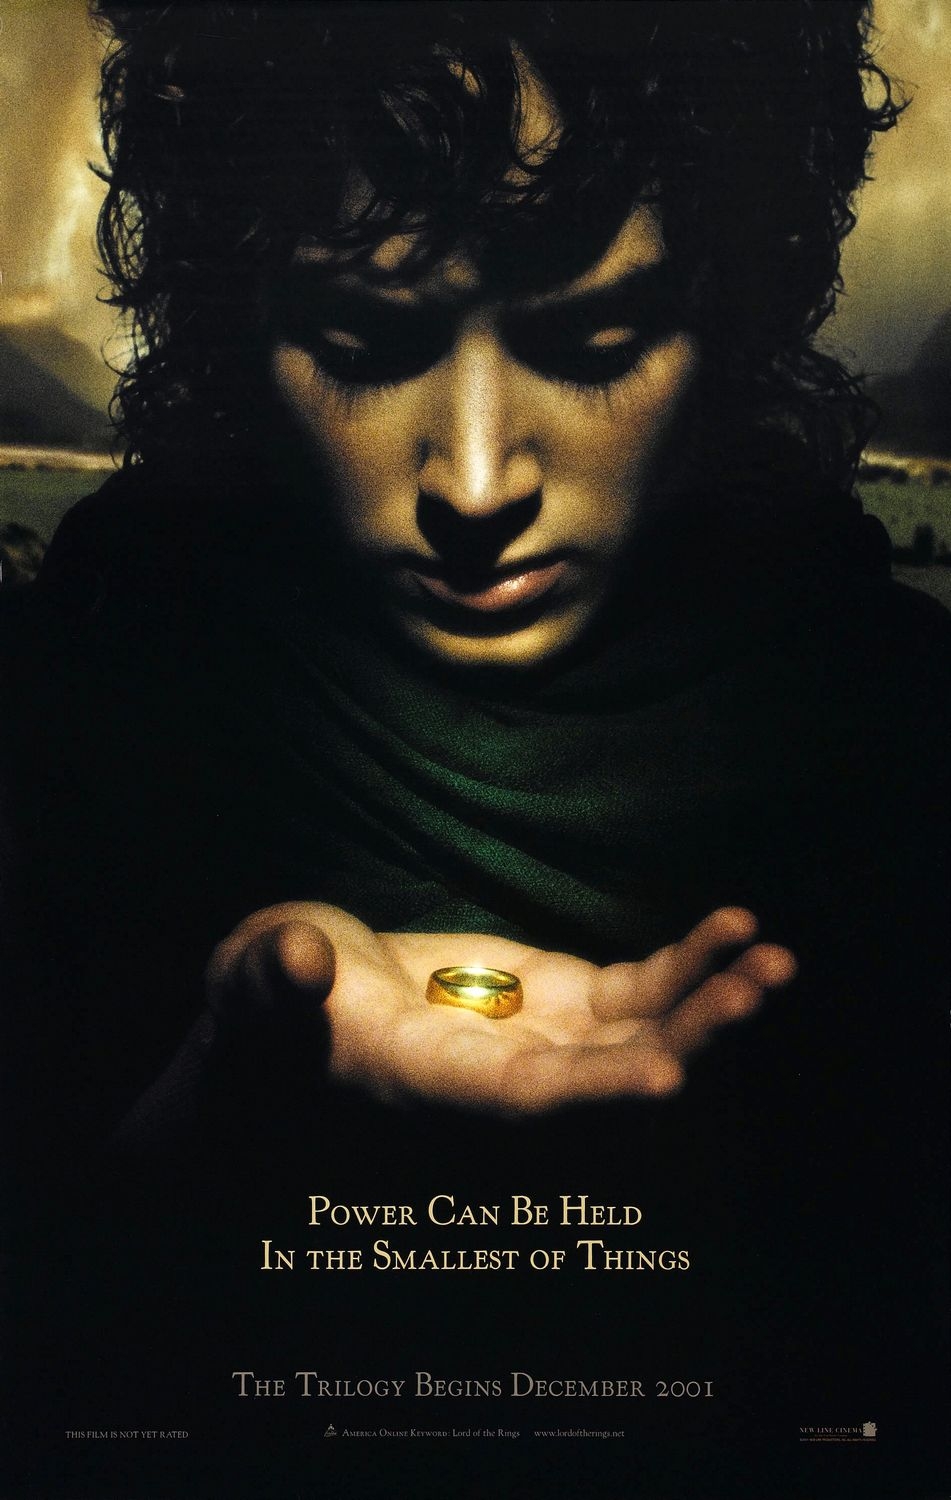 The Lord of the Rings: The Fellowship of the Ring (2001) - Poster US -  500*657px